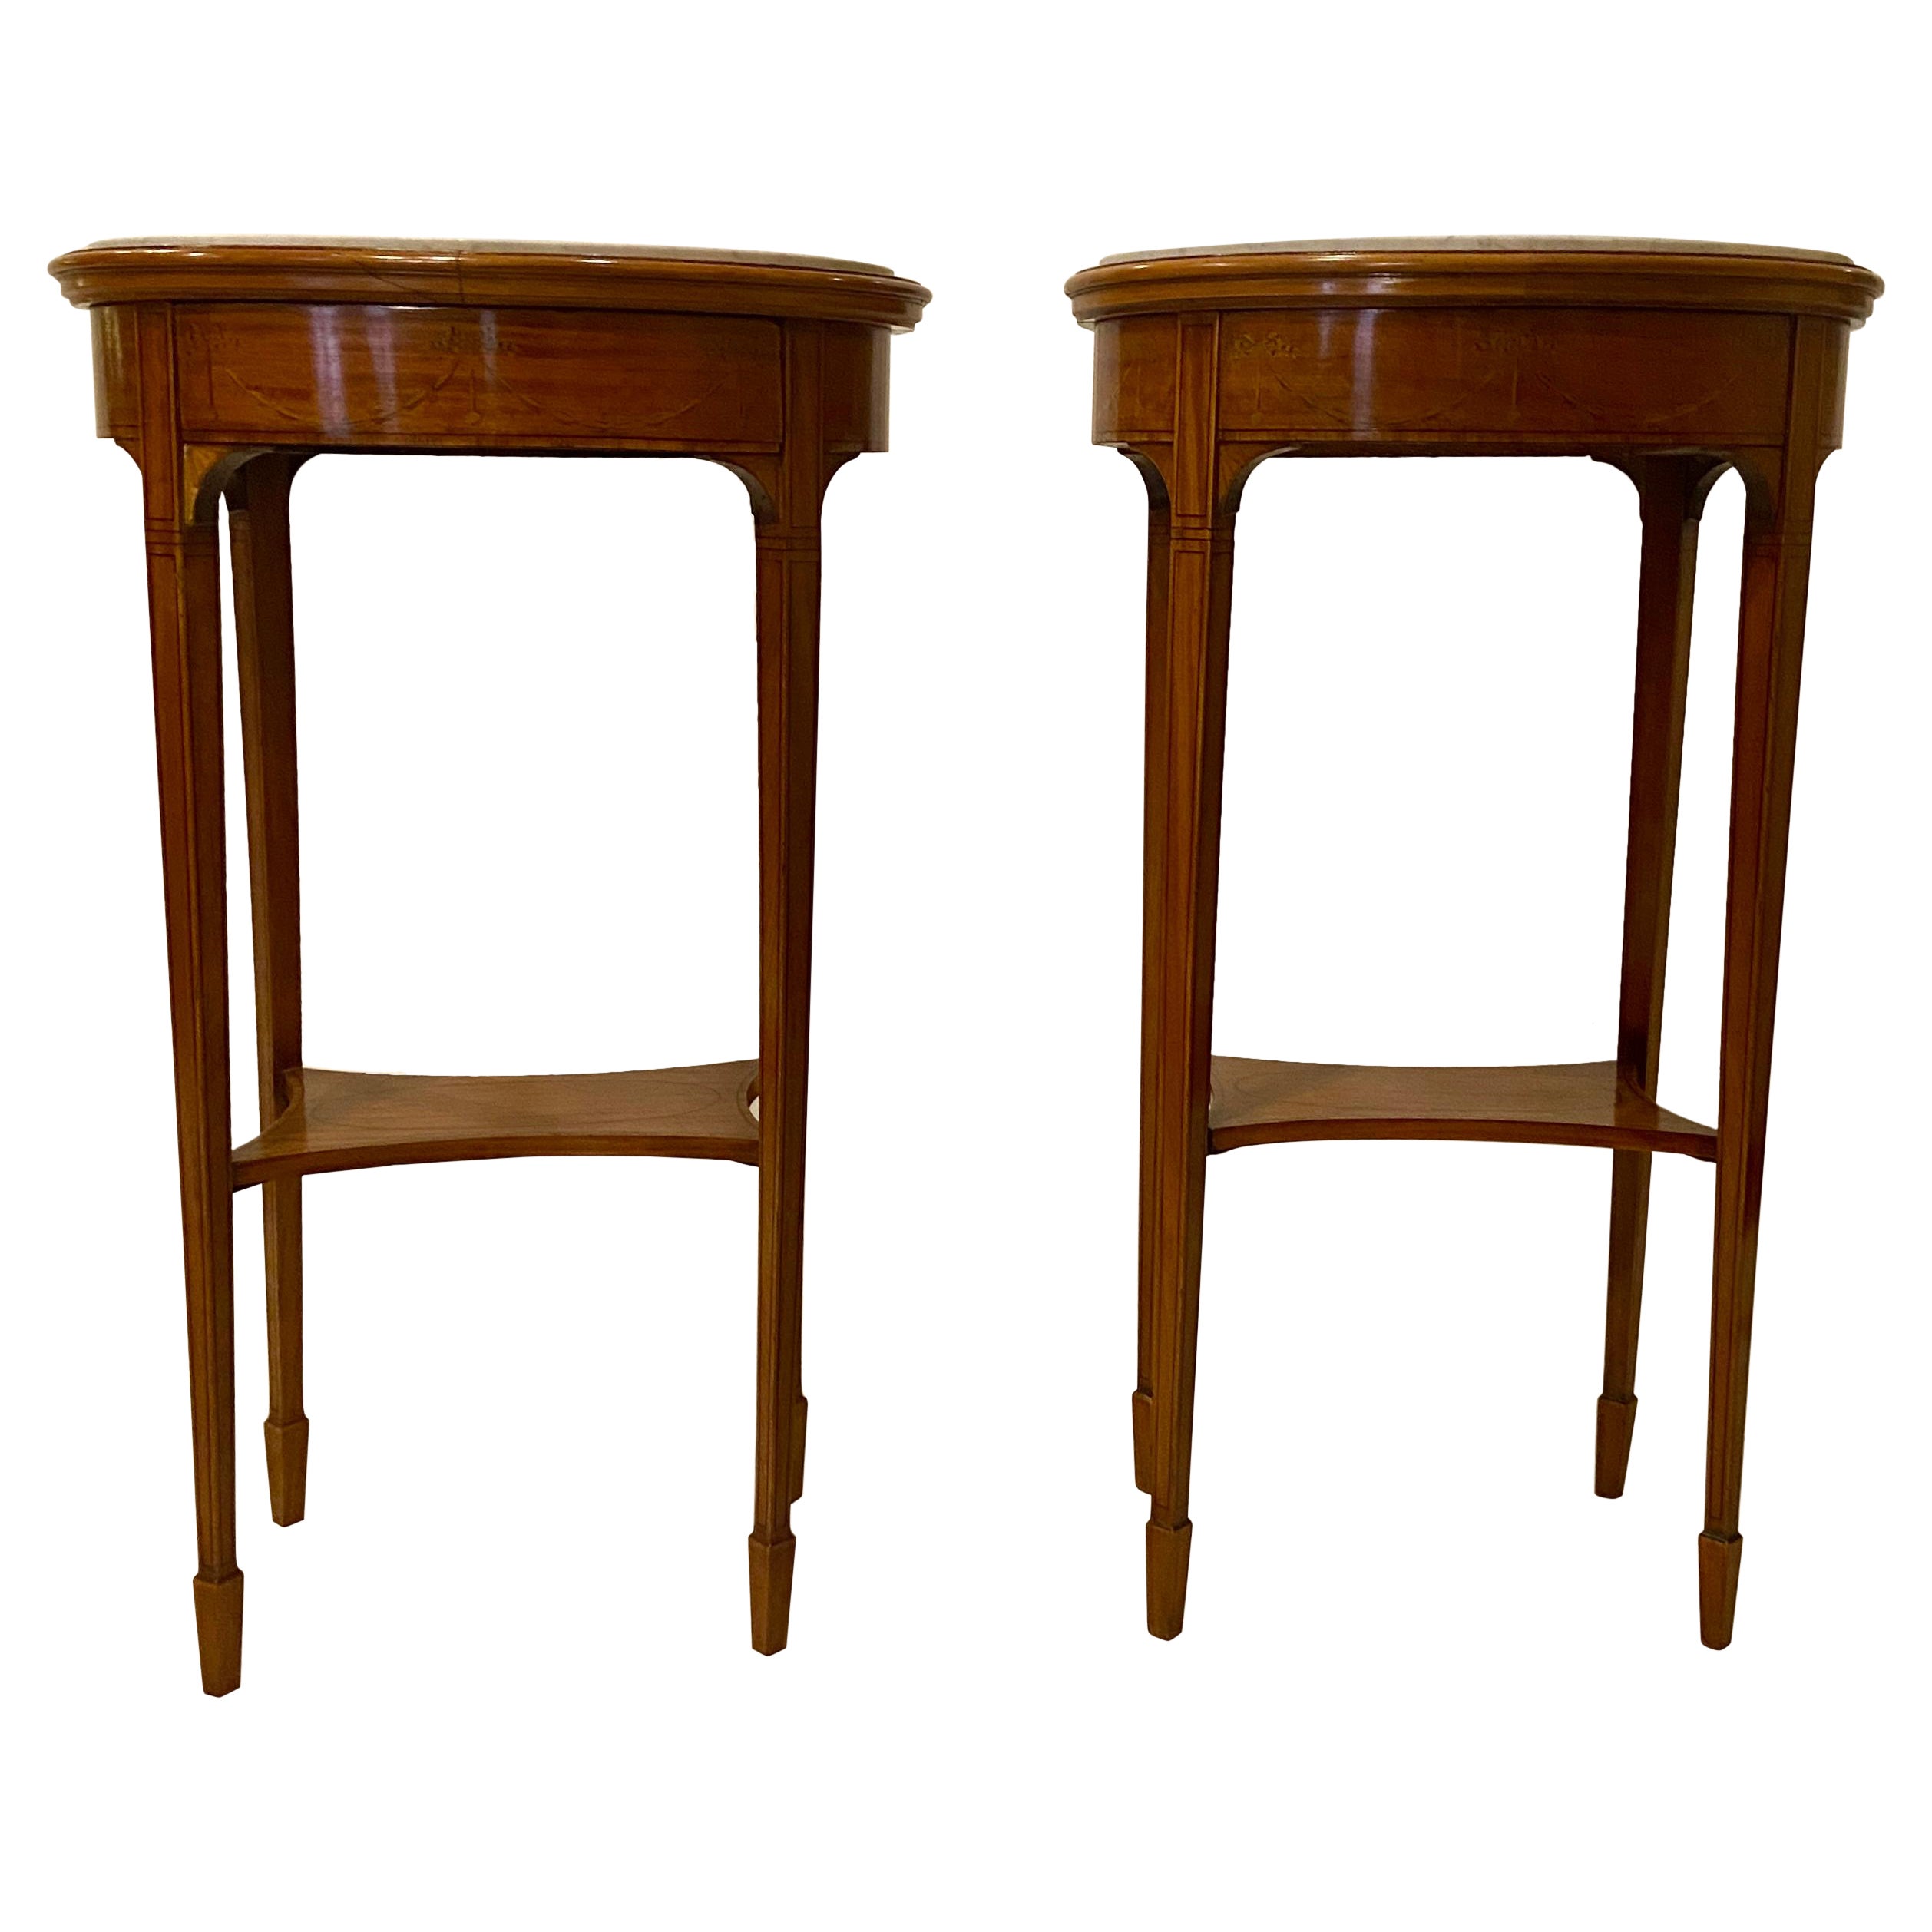 Pair Antique French Grey and White Marble-Top Satinwood Side Tables with Inlay